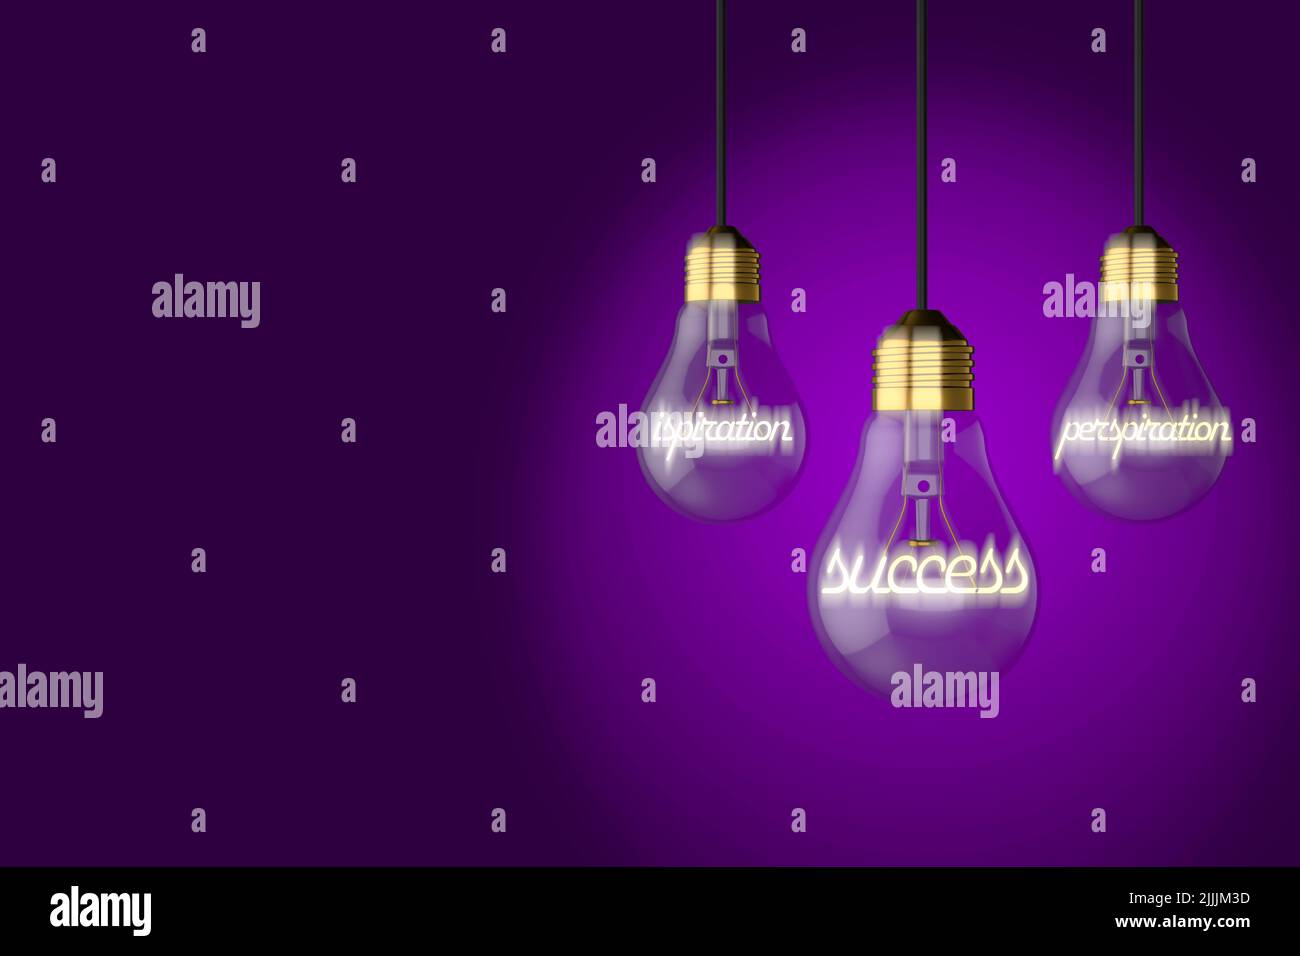 old style light bulbs lightbulbs illustrating inspiration perspiration success concept on a colourful colorful purple background Stock Photo